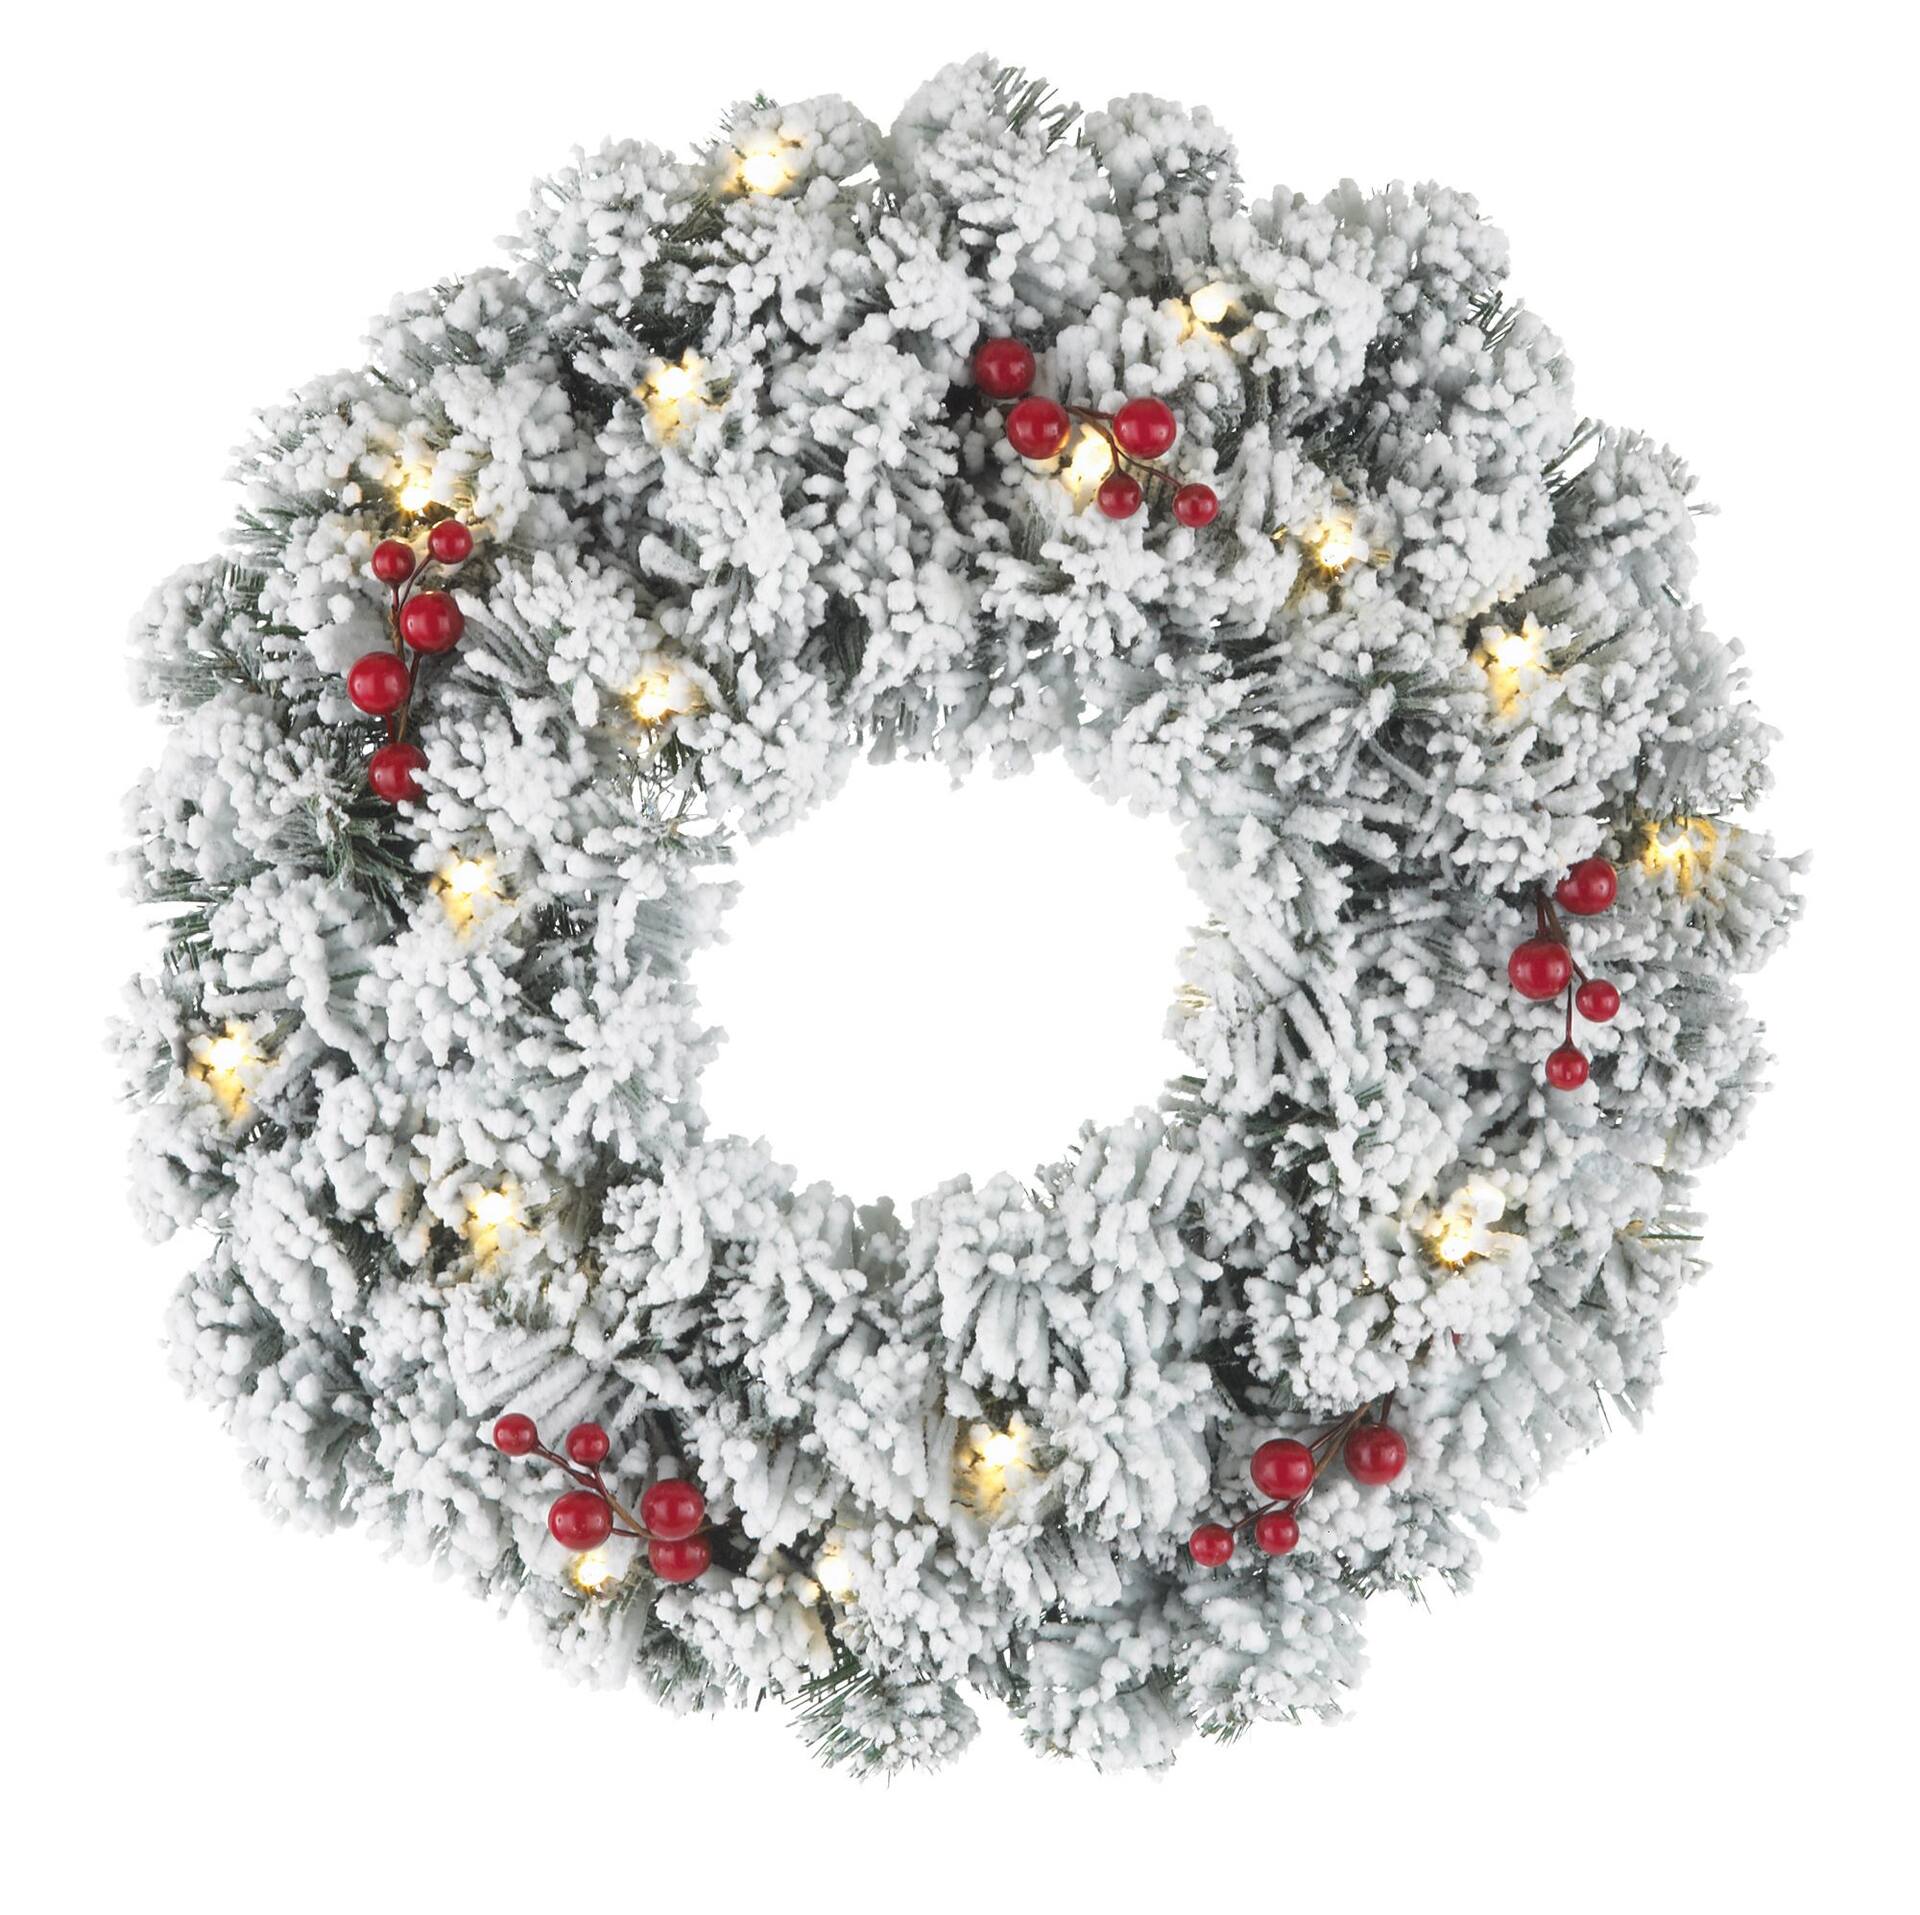 NOMA Pre-Lit Wreath and Topiary Potted Tree, 2-pc | Canadian Tire